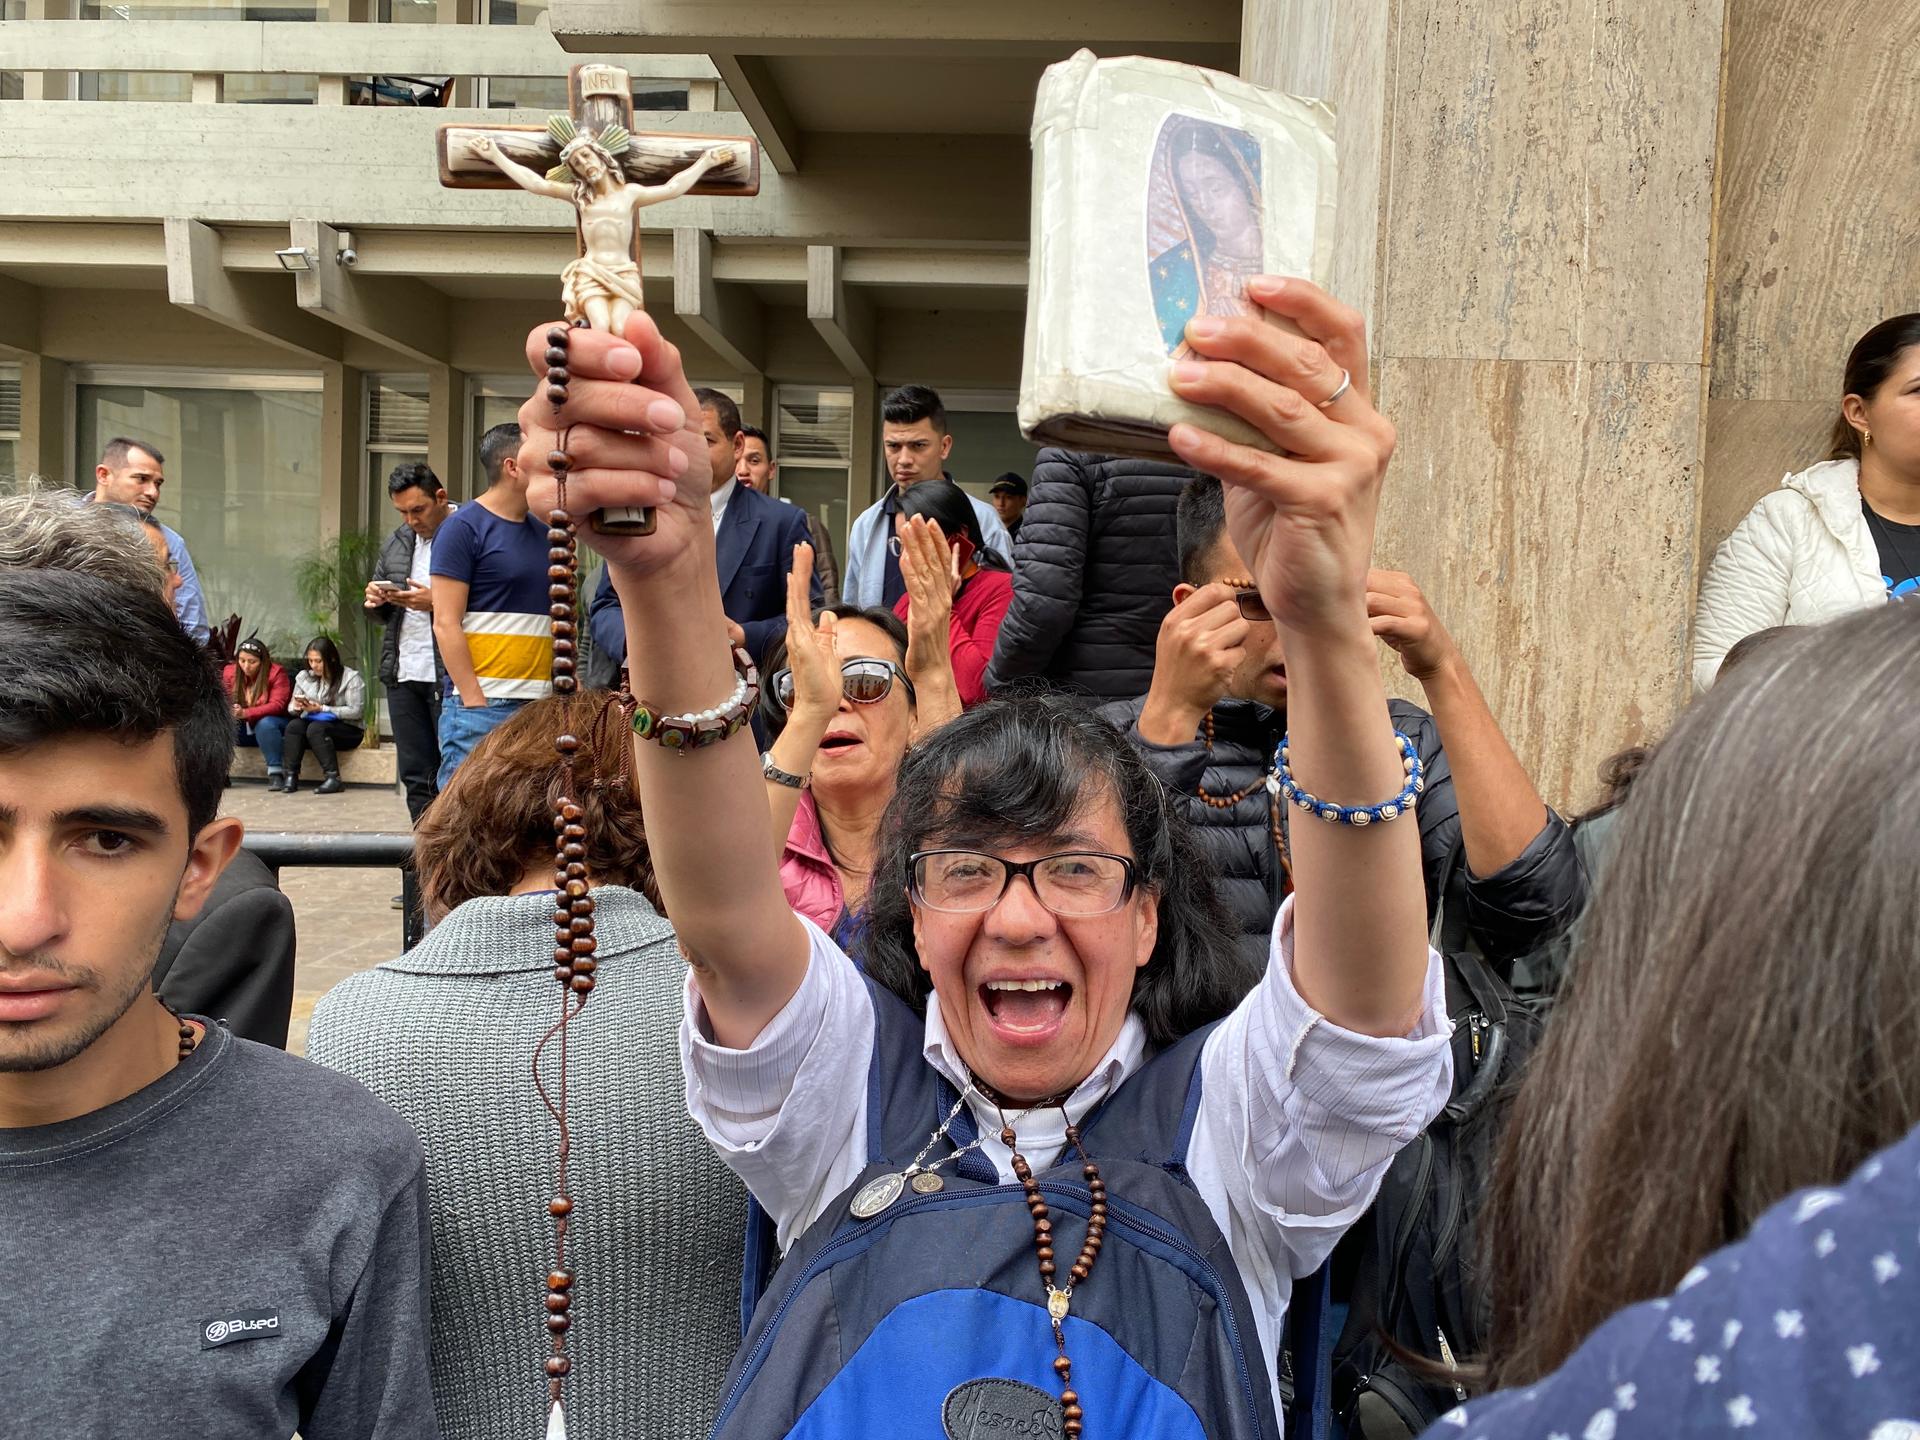 A demonstrator displays her bible and crucifix during a protest outside Colombia's constitutional court.